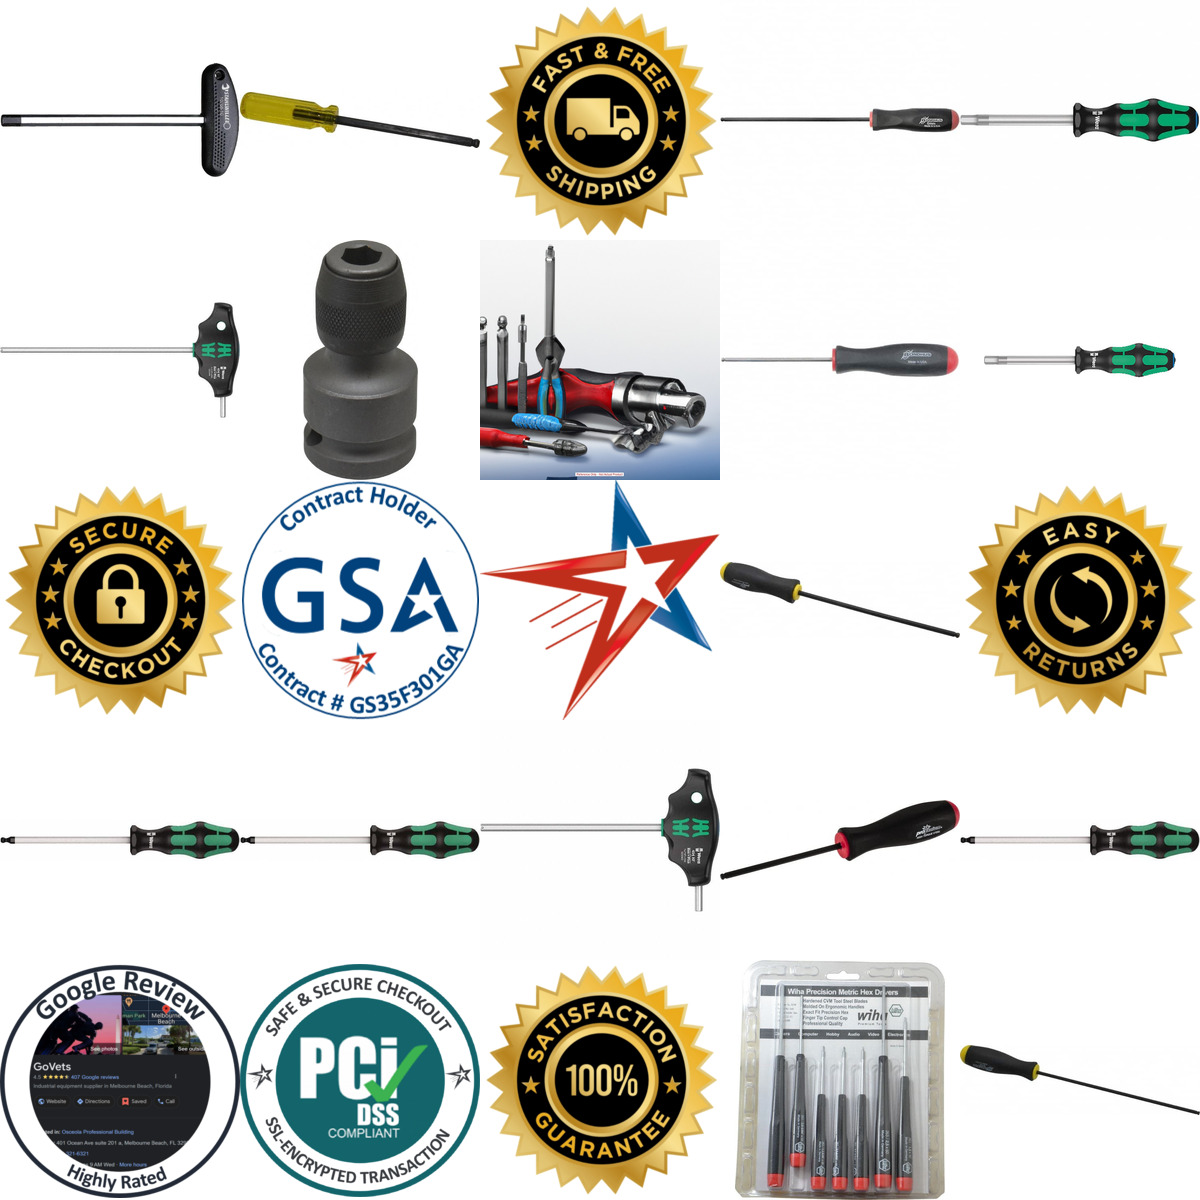 A selection of Hex Drivers and Accessories products on GoVets